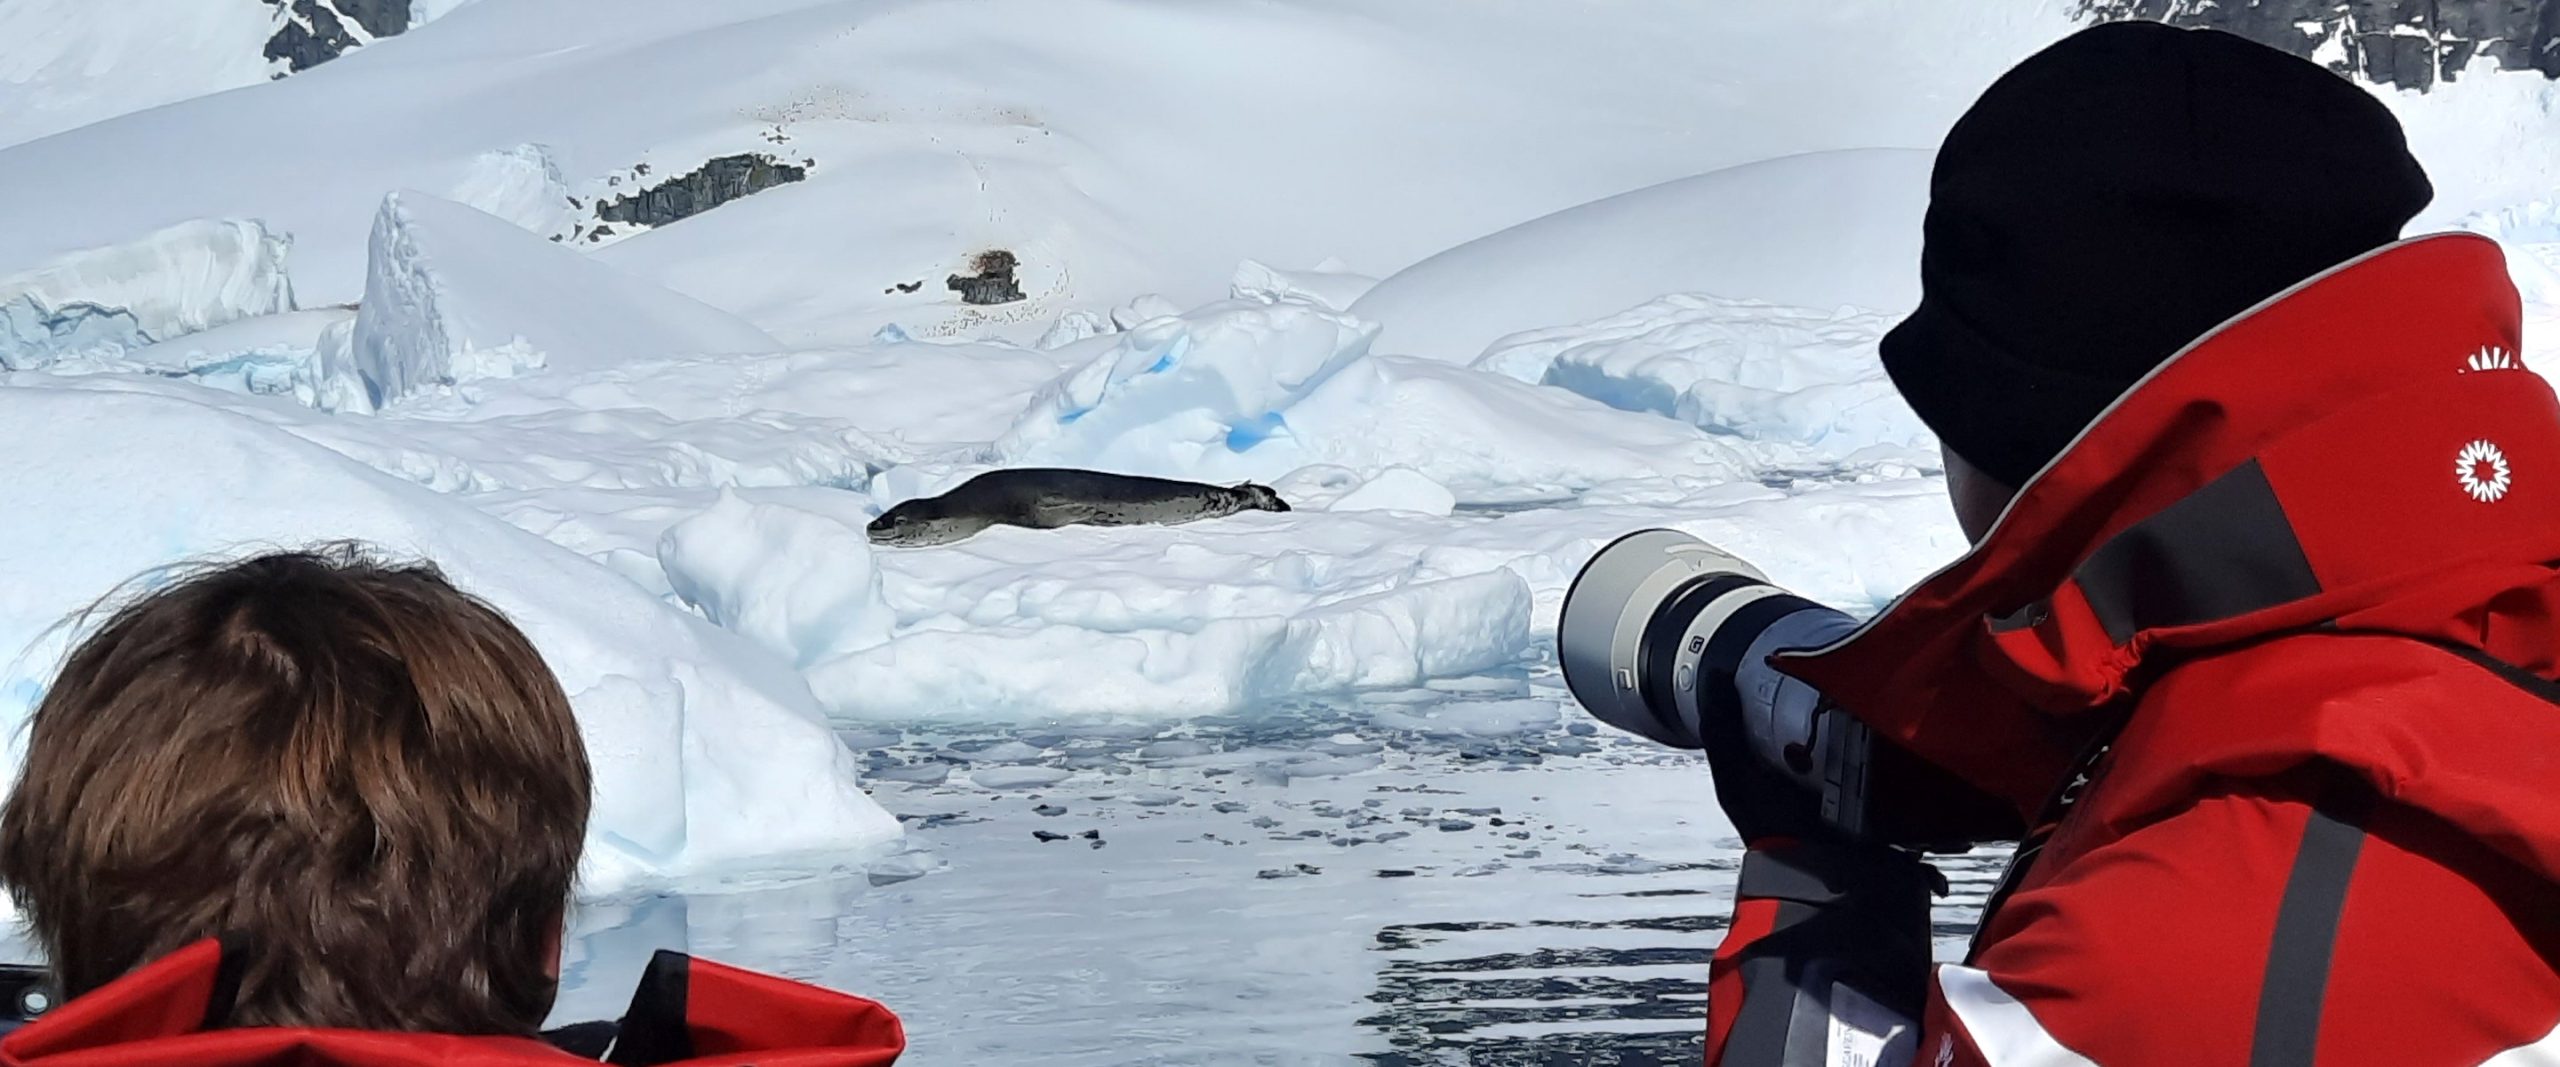 Should you visit Antarctica or the Arctic? - Lonely Planet